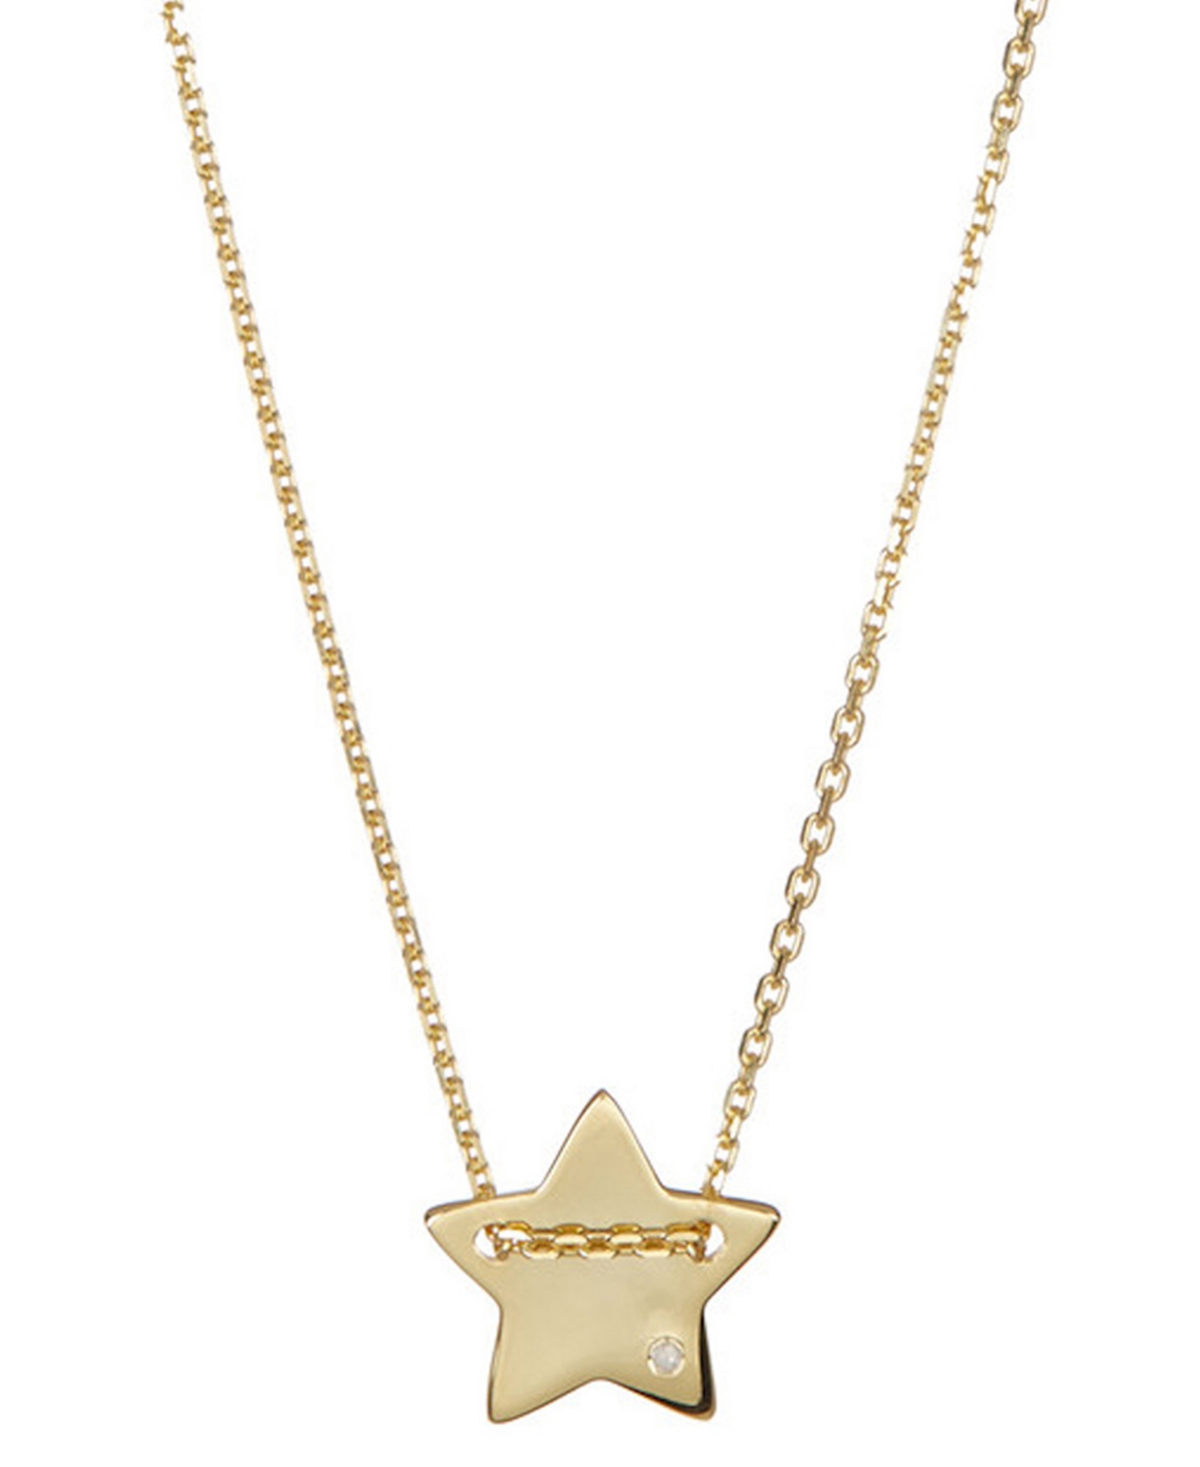 14k Gold-Plated Star Charm Pendant Necklace, 16" + 2" extender - Gold